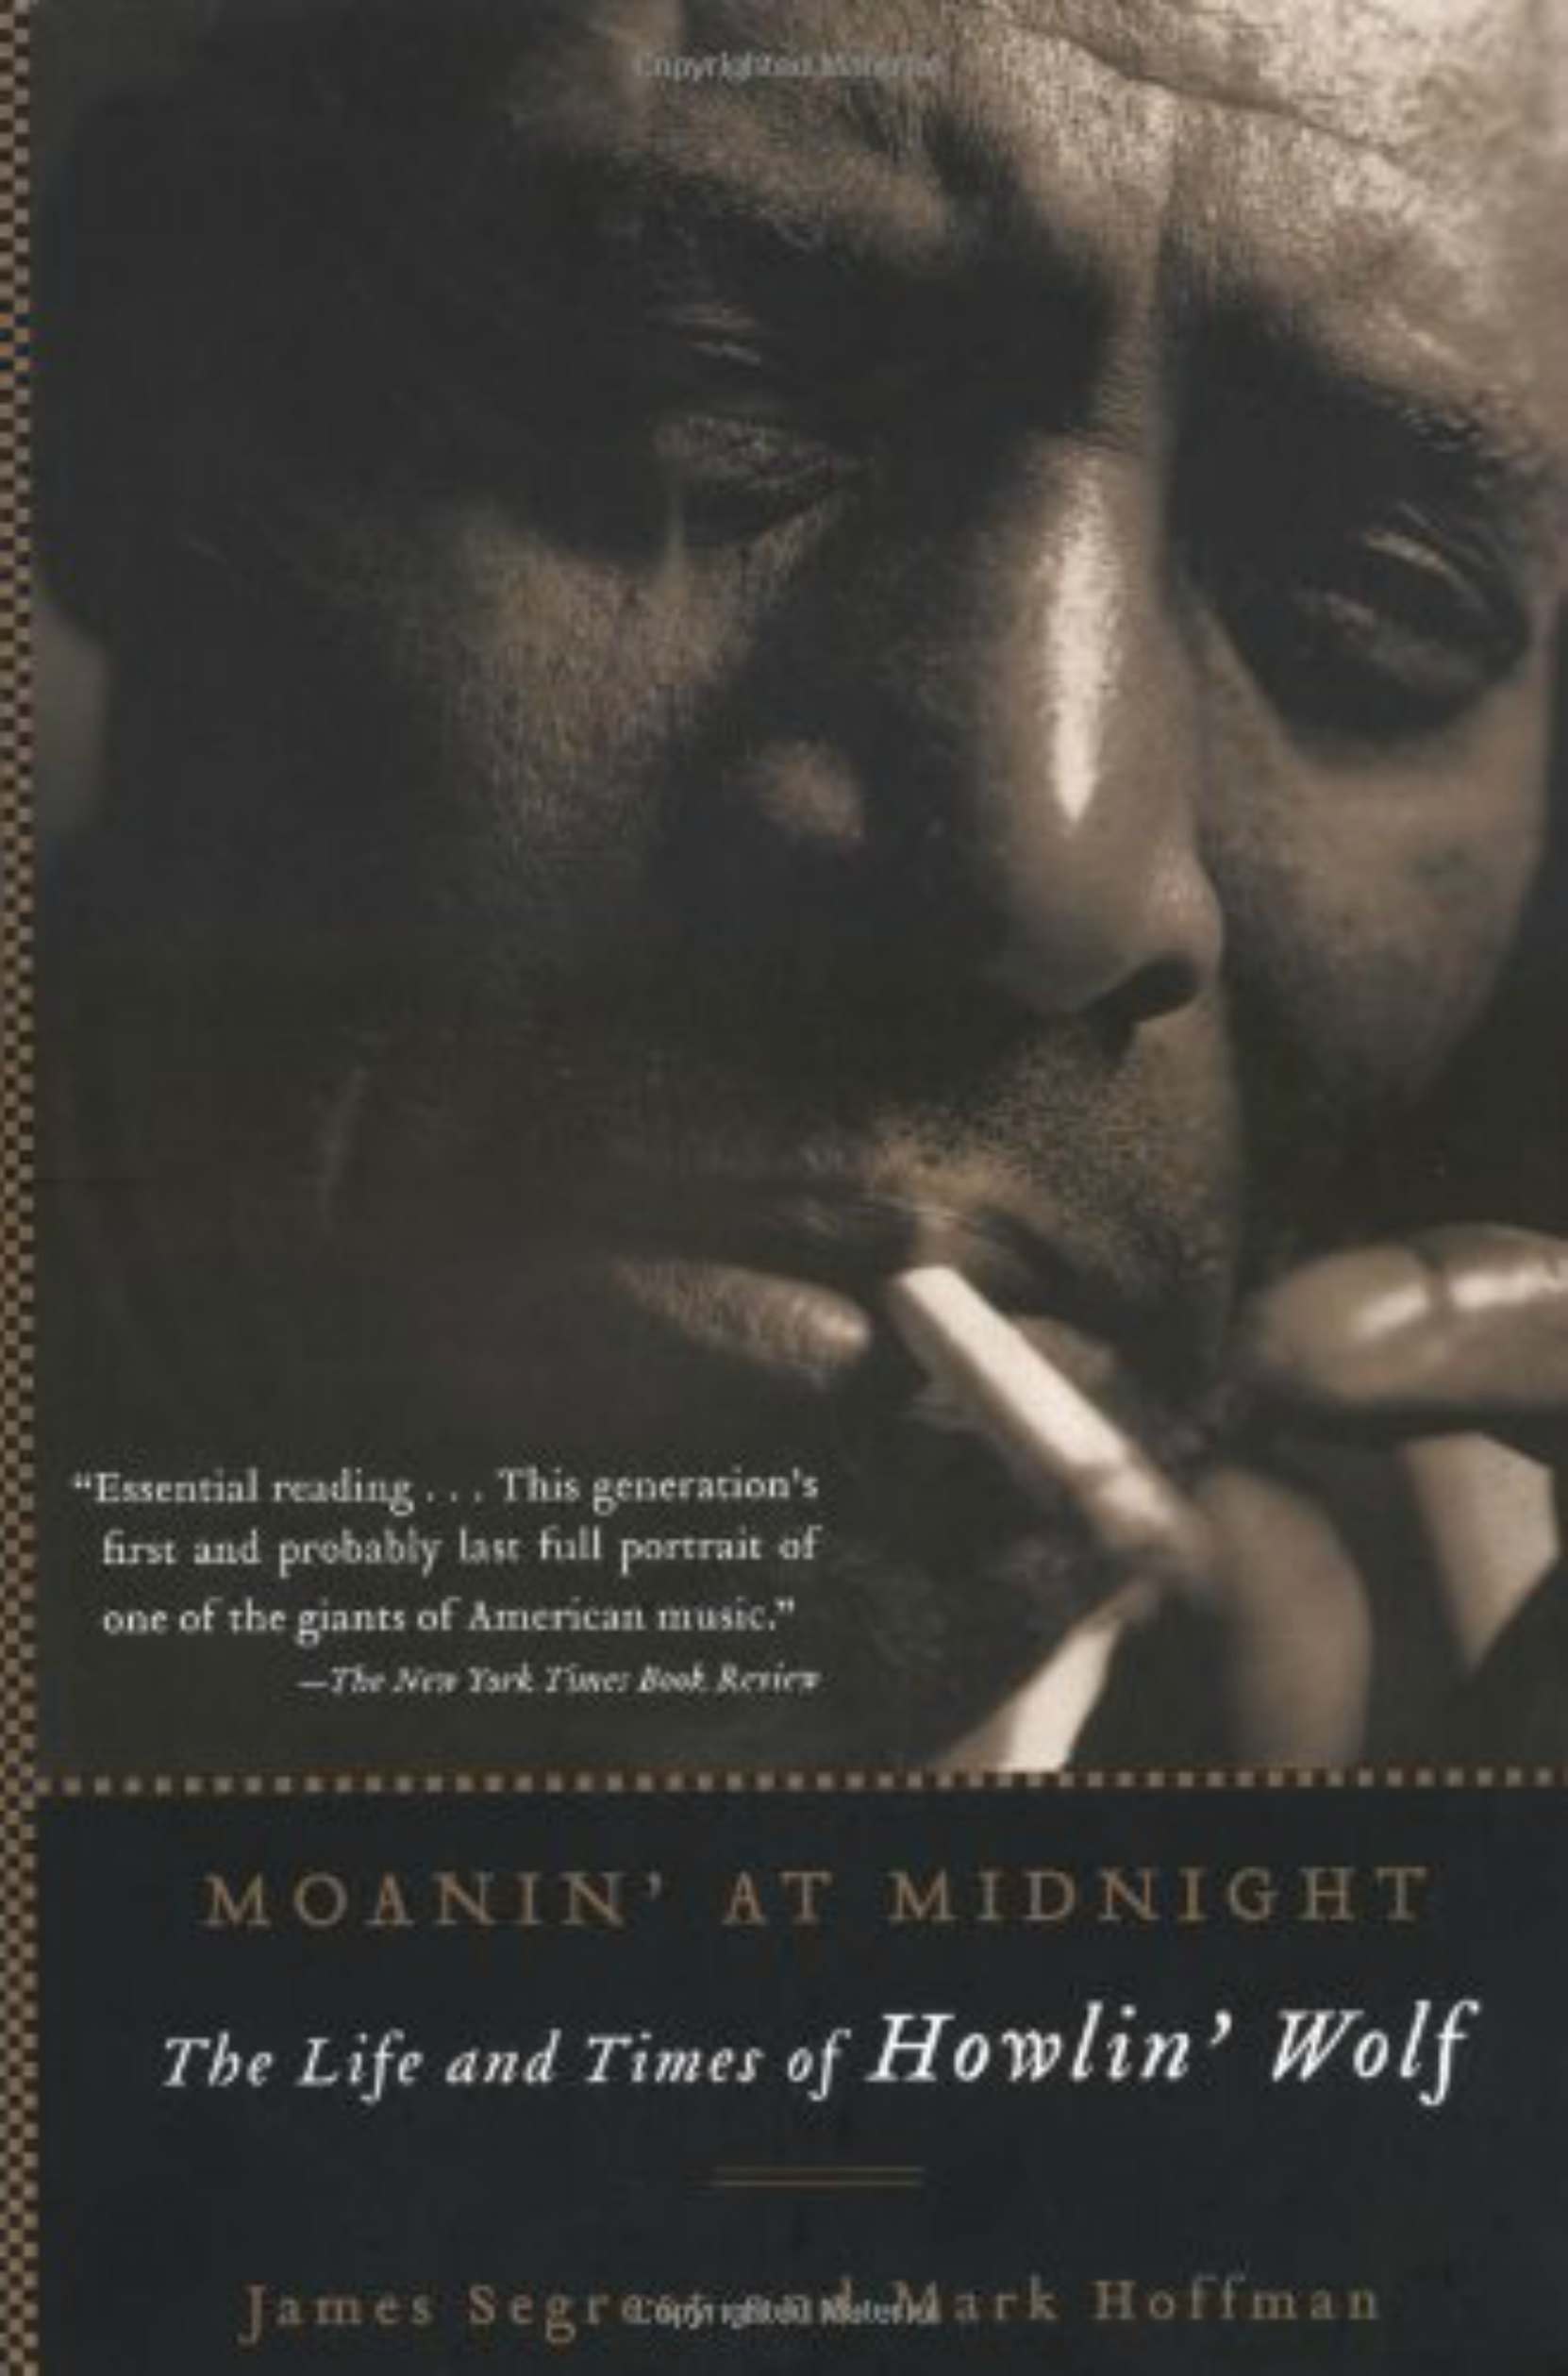 Book cover, Moanin' At Midnight - The Life and Times of Howlin' Wolf by James Segrest and Mark Hoffman